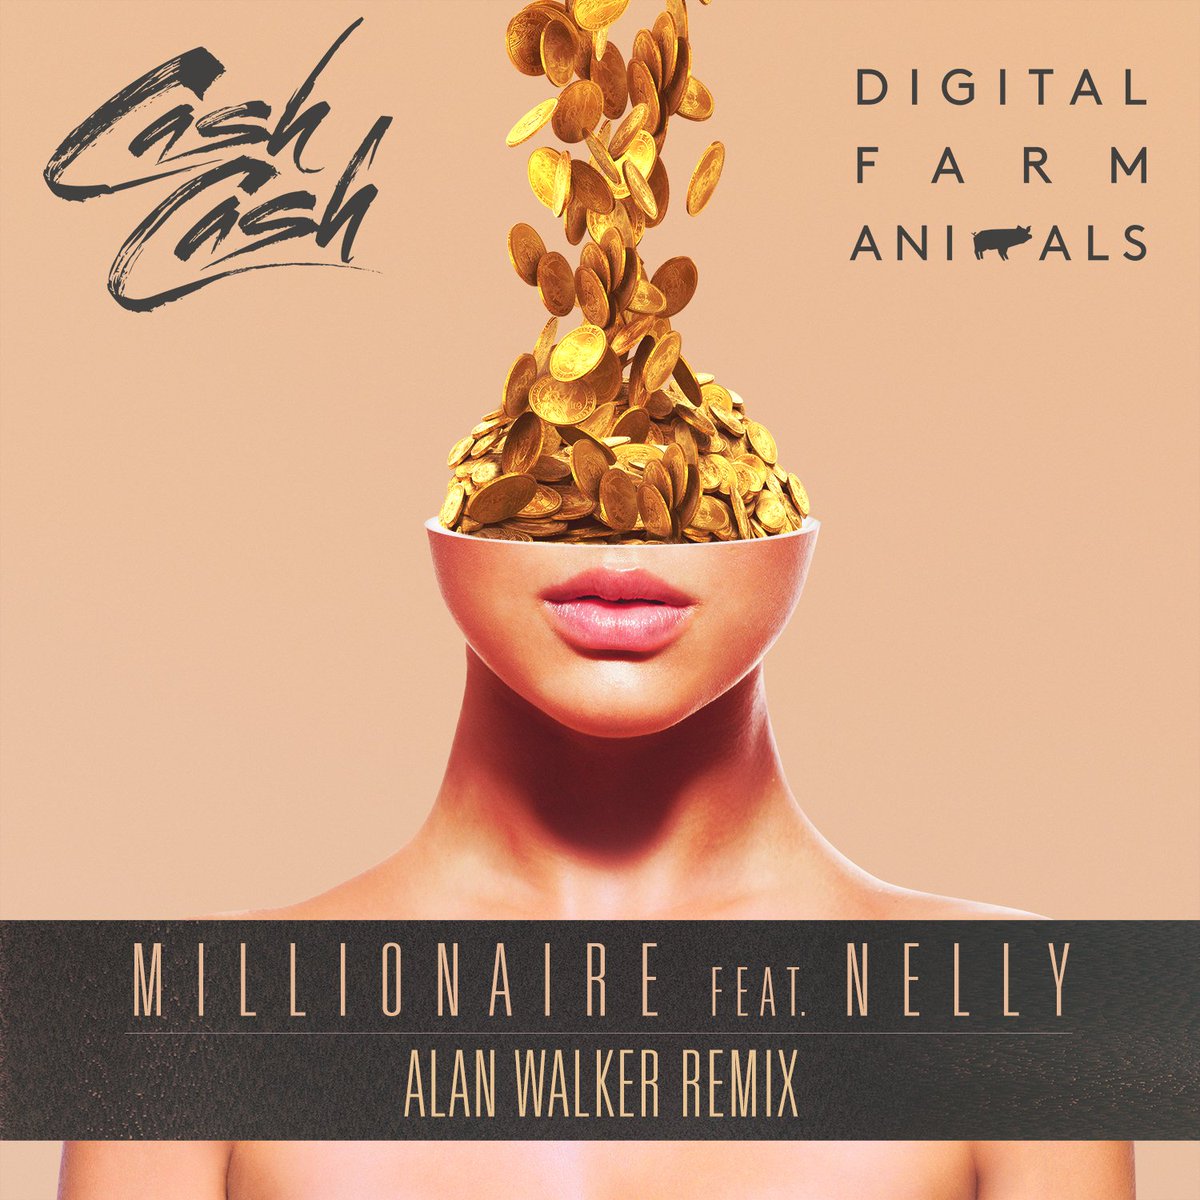 RT @cashcash: Who else is ready for this ???????????? remix of #Millionaire feat. @Nelly_Mo by @IAmAlanWalker dropping tomorrow on @Spotify https://…